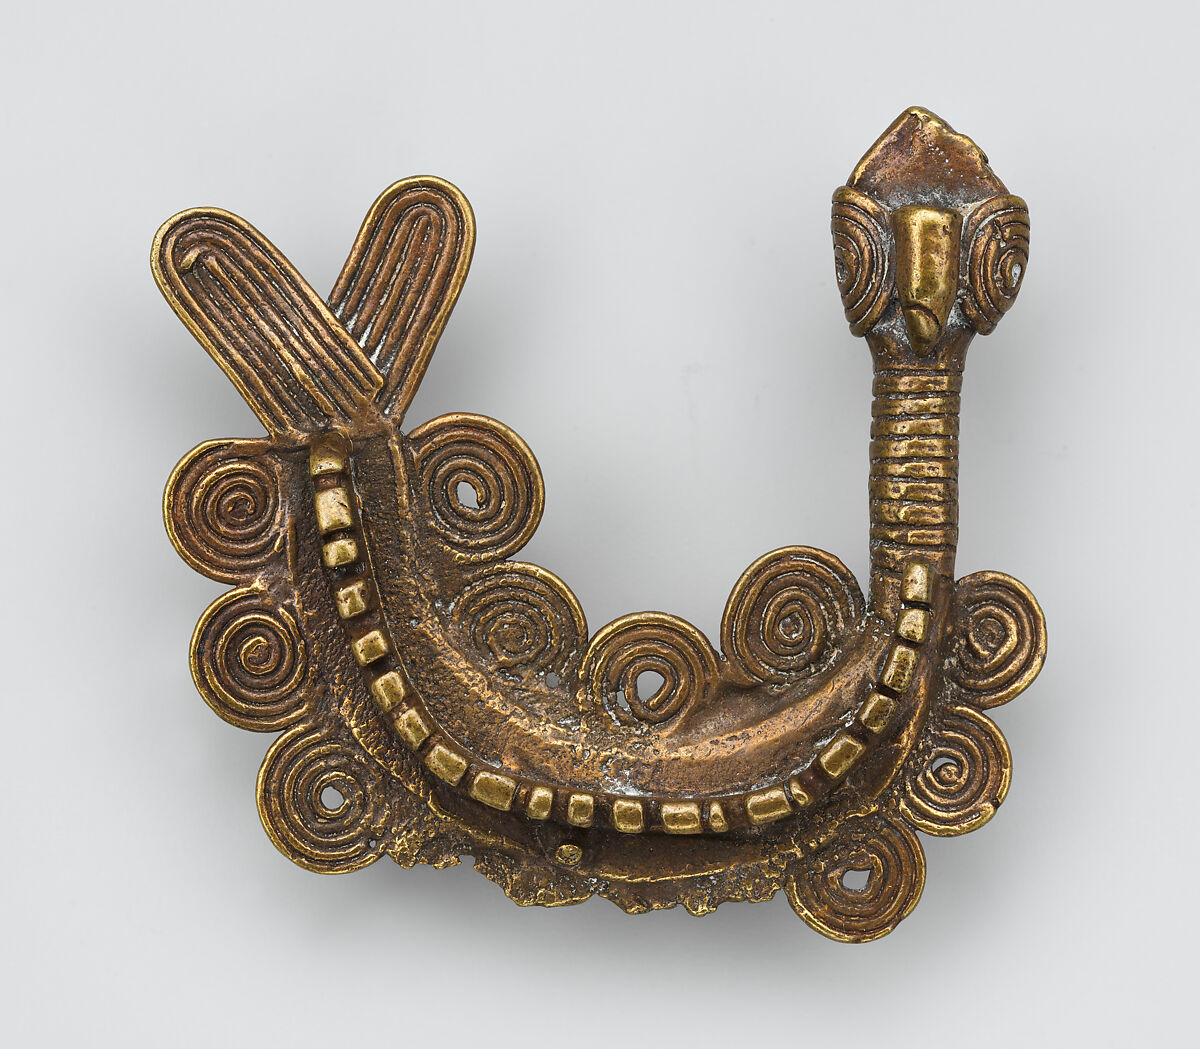 Gold Weight: Mudfish, Brass, Akan peoples 